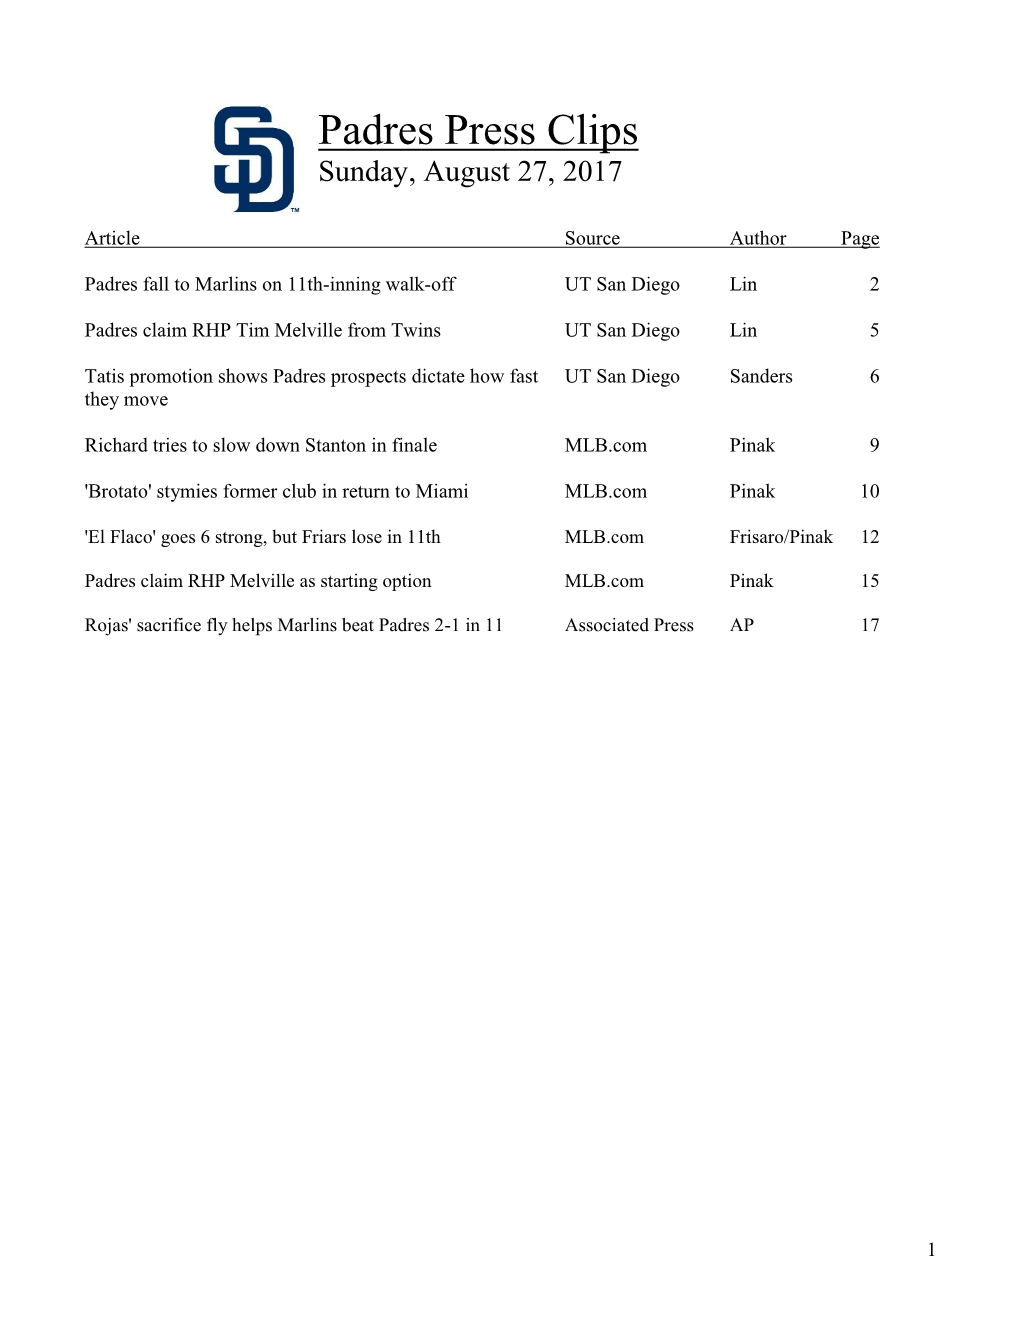 Padres Press Clips Sunday, August 27, 2017